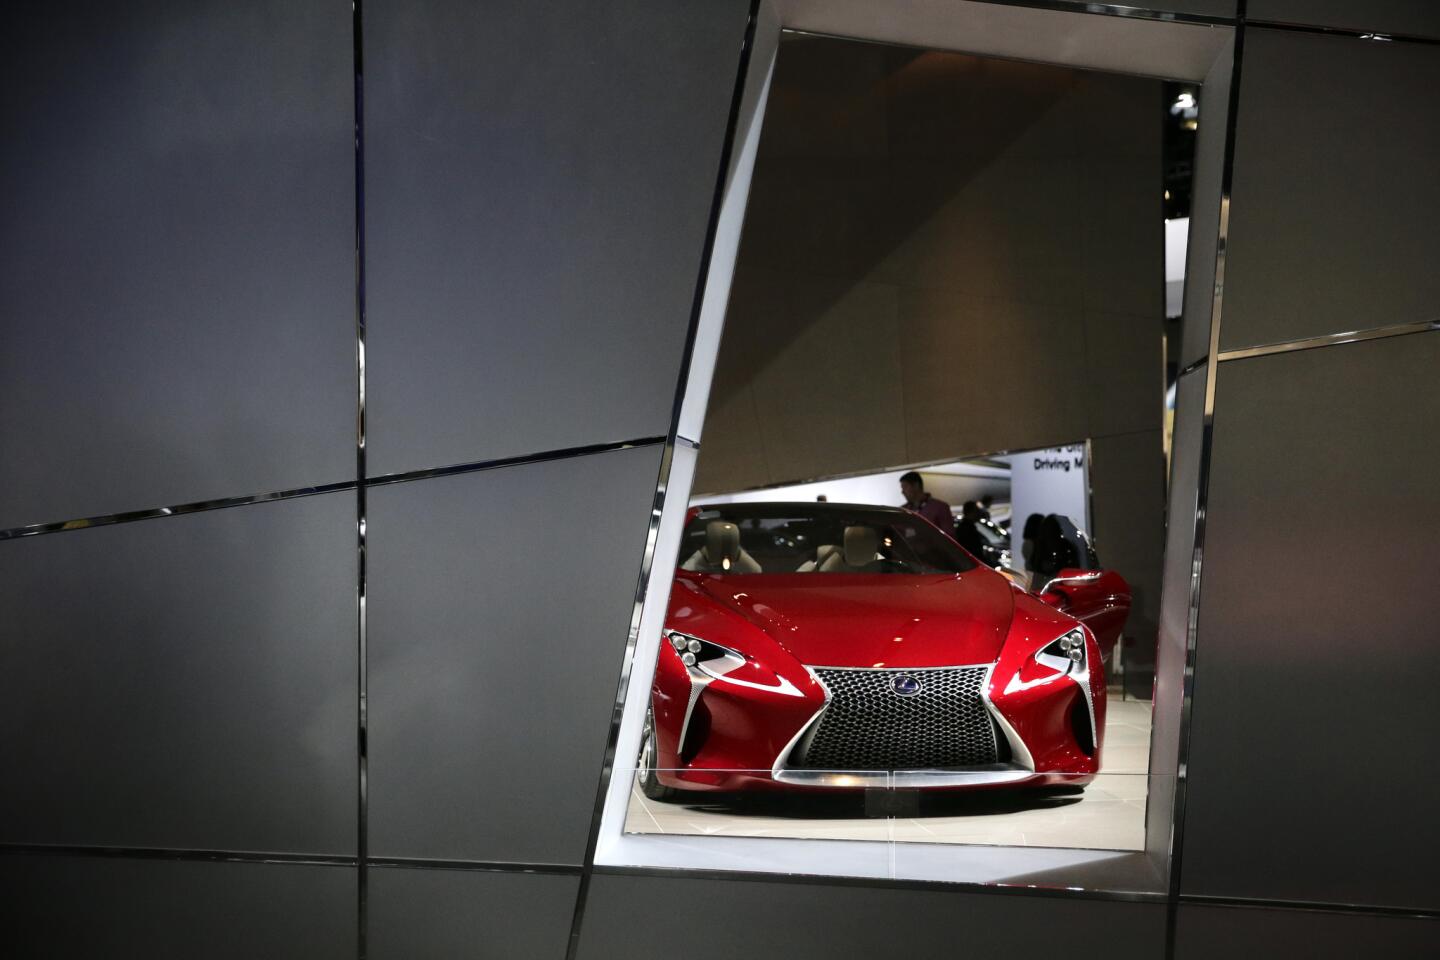 The Lexus LF-LC hybrid coupe concept car is shown at the L.A. Auto Show.